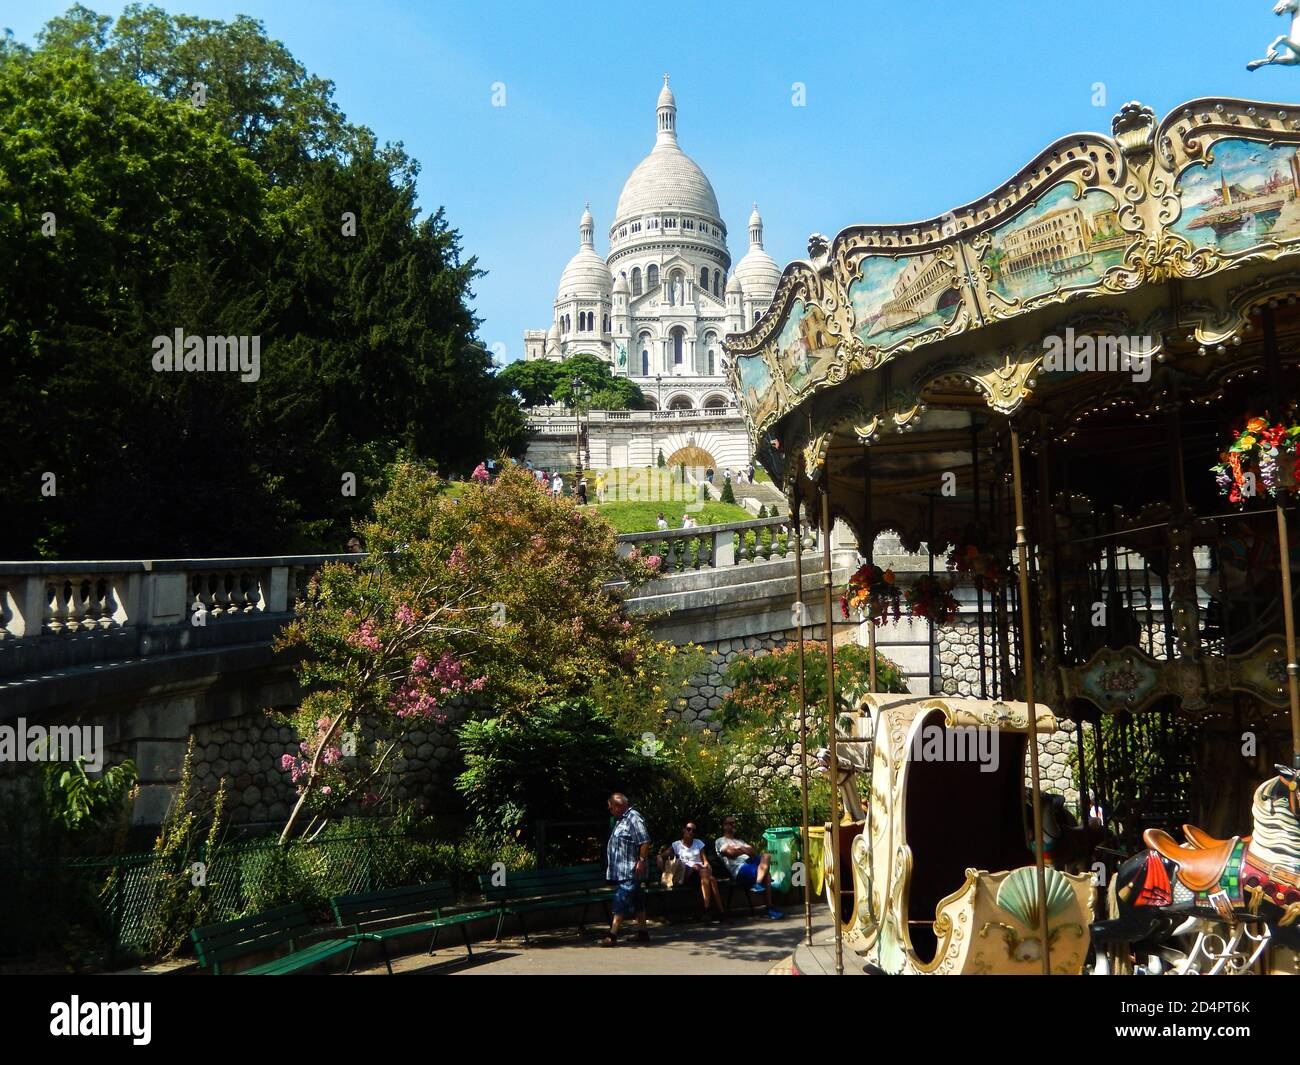 Basilika Sacre Cœur With A Carousel And Trees In Front Of It Stock Photo Alamy